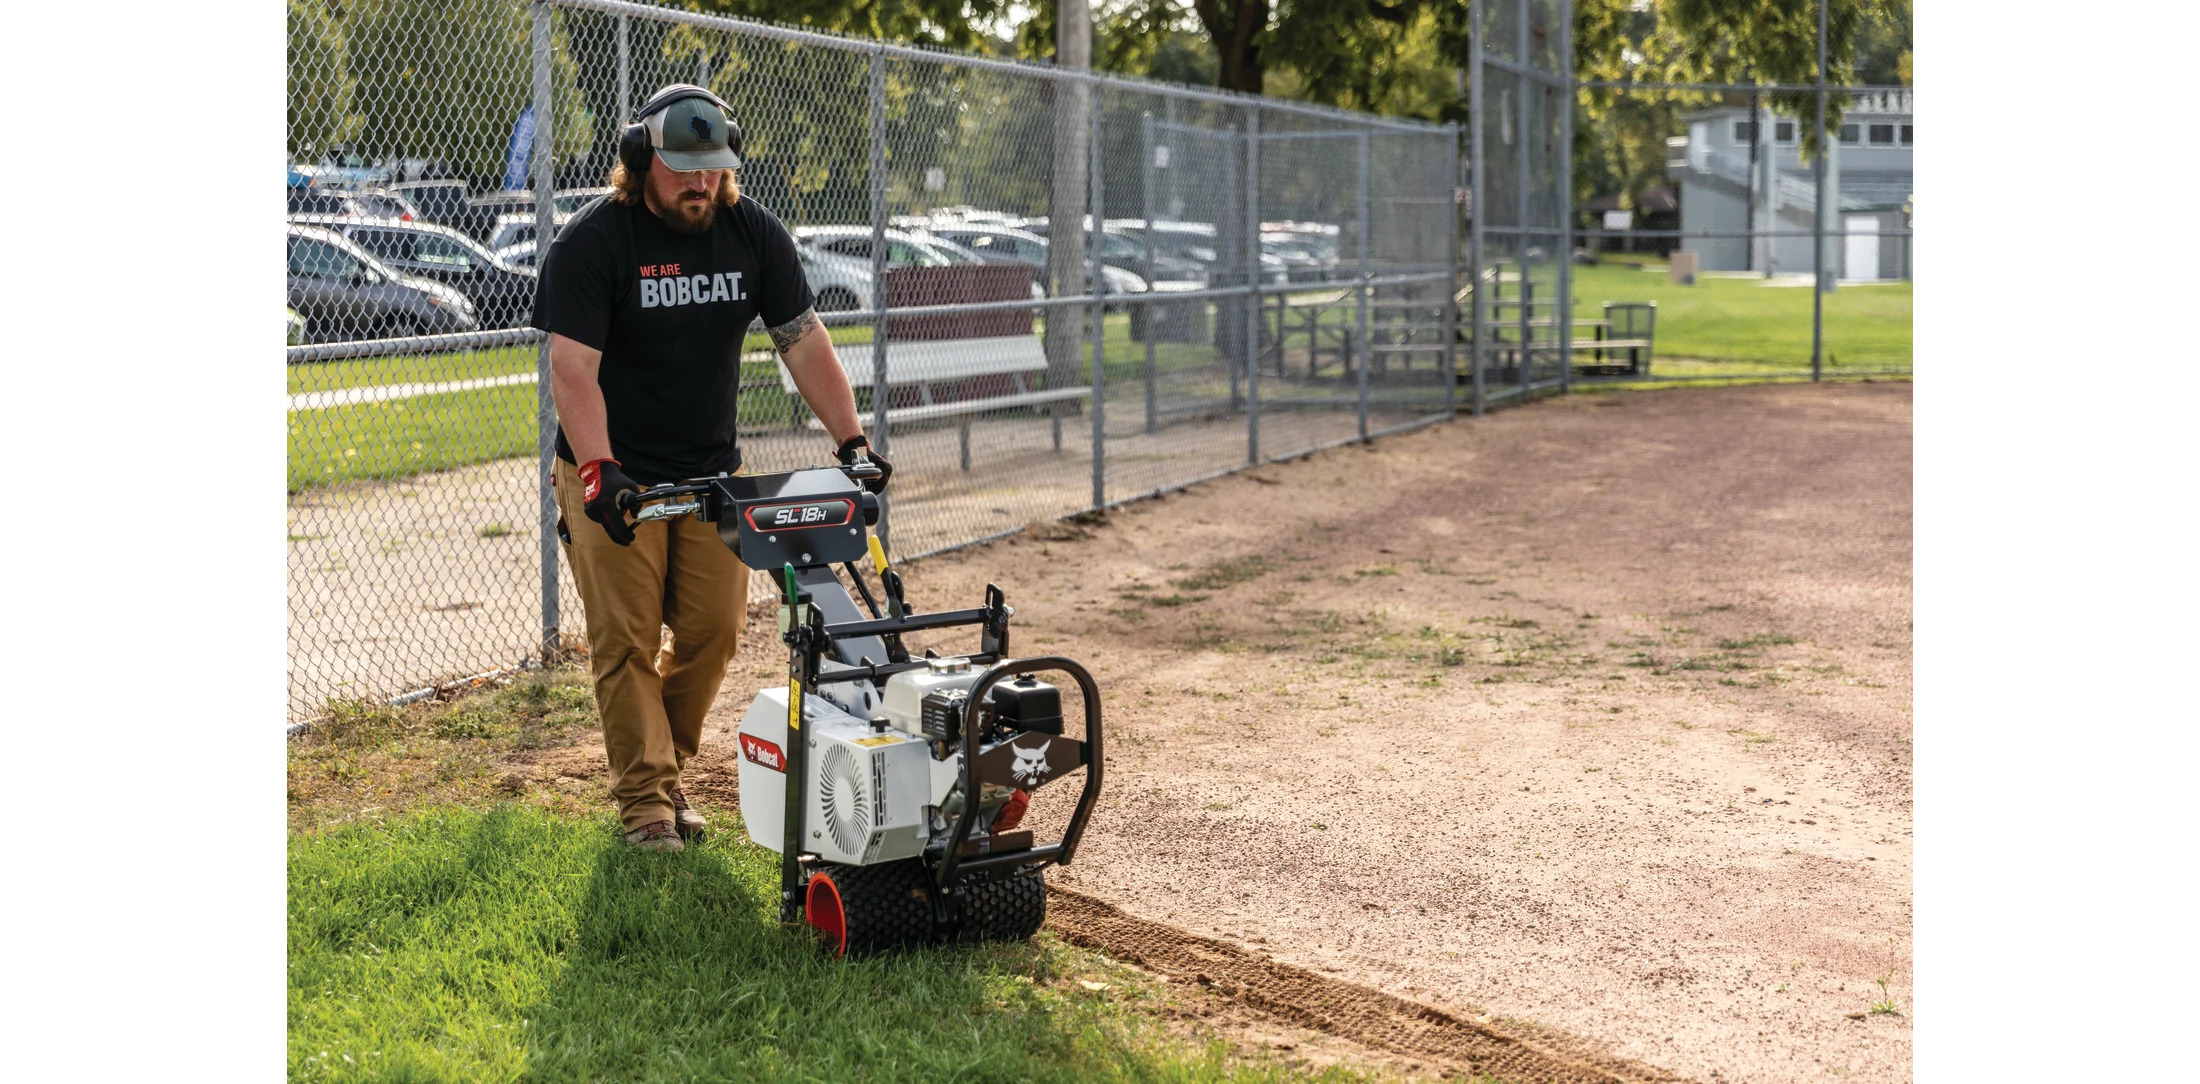 Browse Specs and more for the Bobcat SC18 Sod Cutter – Briggs & Stratton Engine - Bobcat of Indy